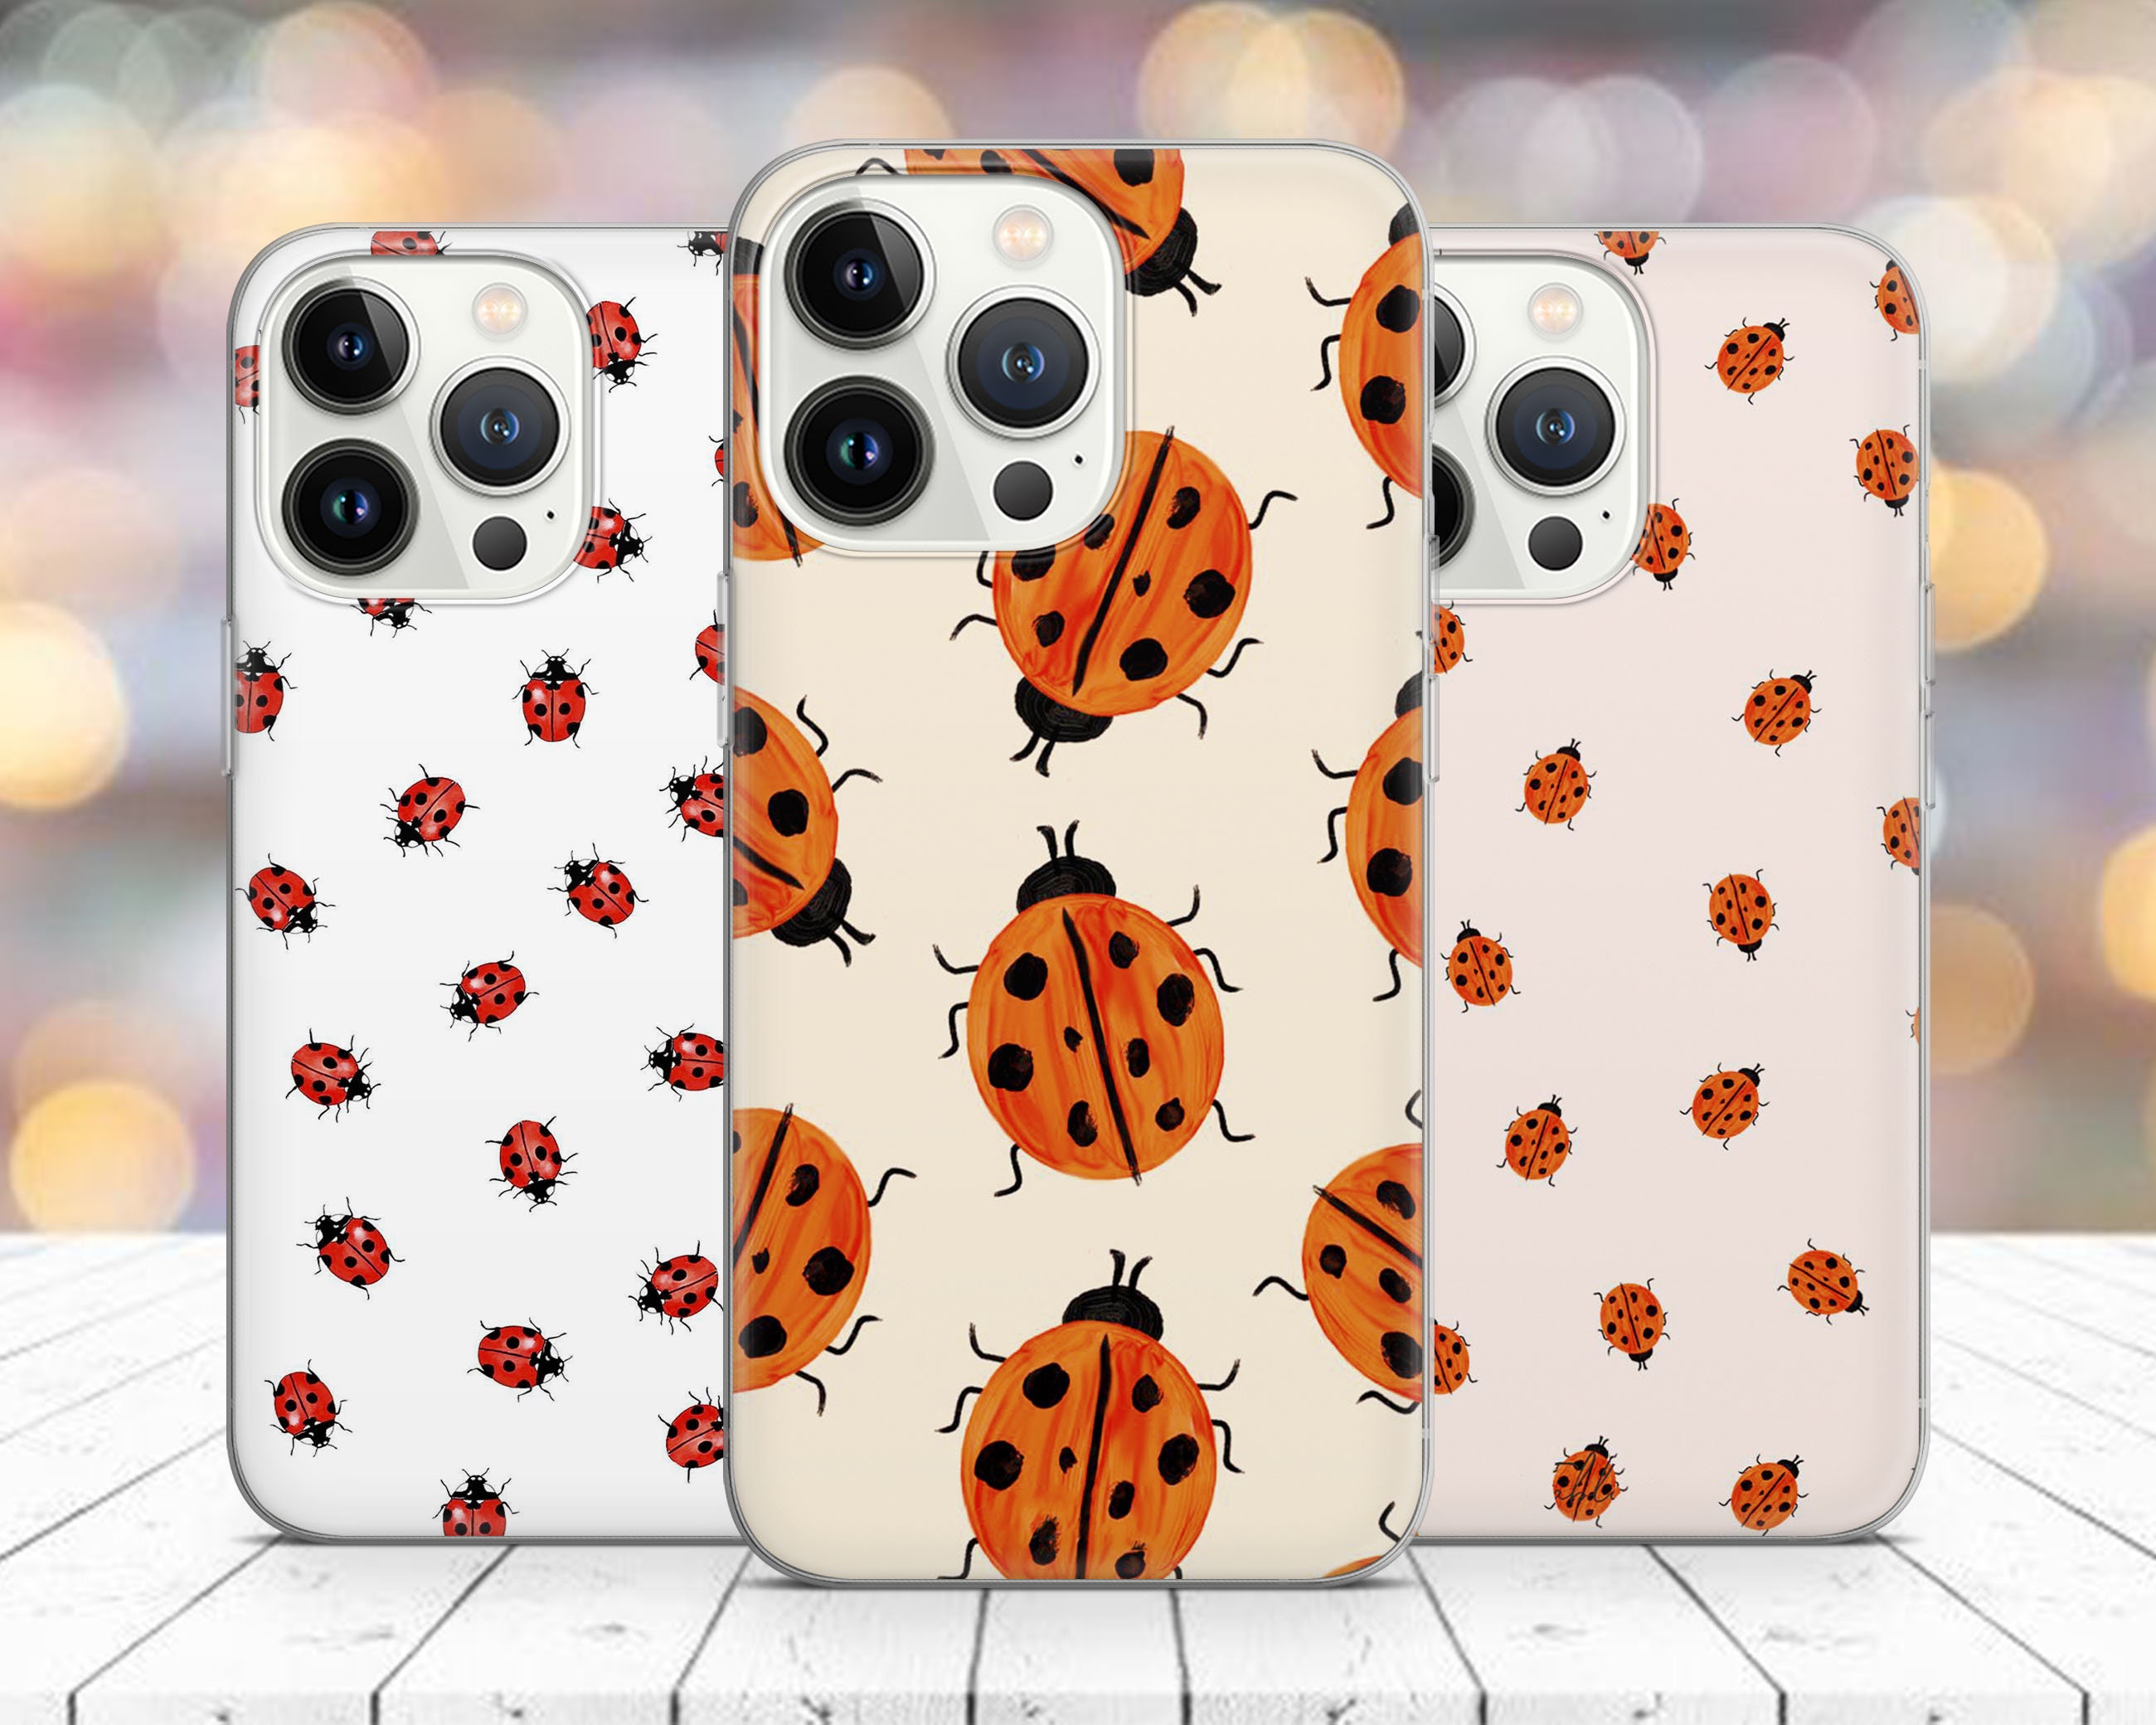  iPhone 12 Pro Max lady bugs for your garden live Case